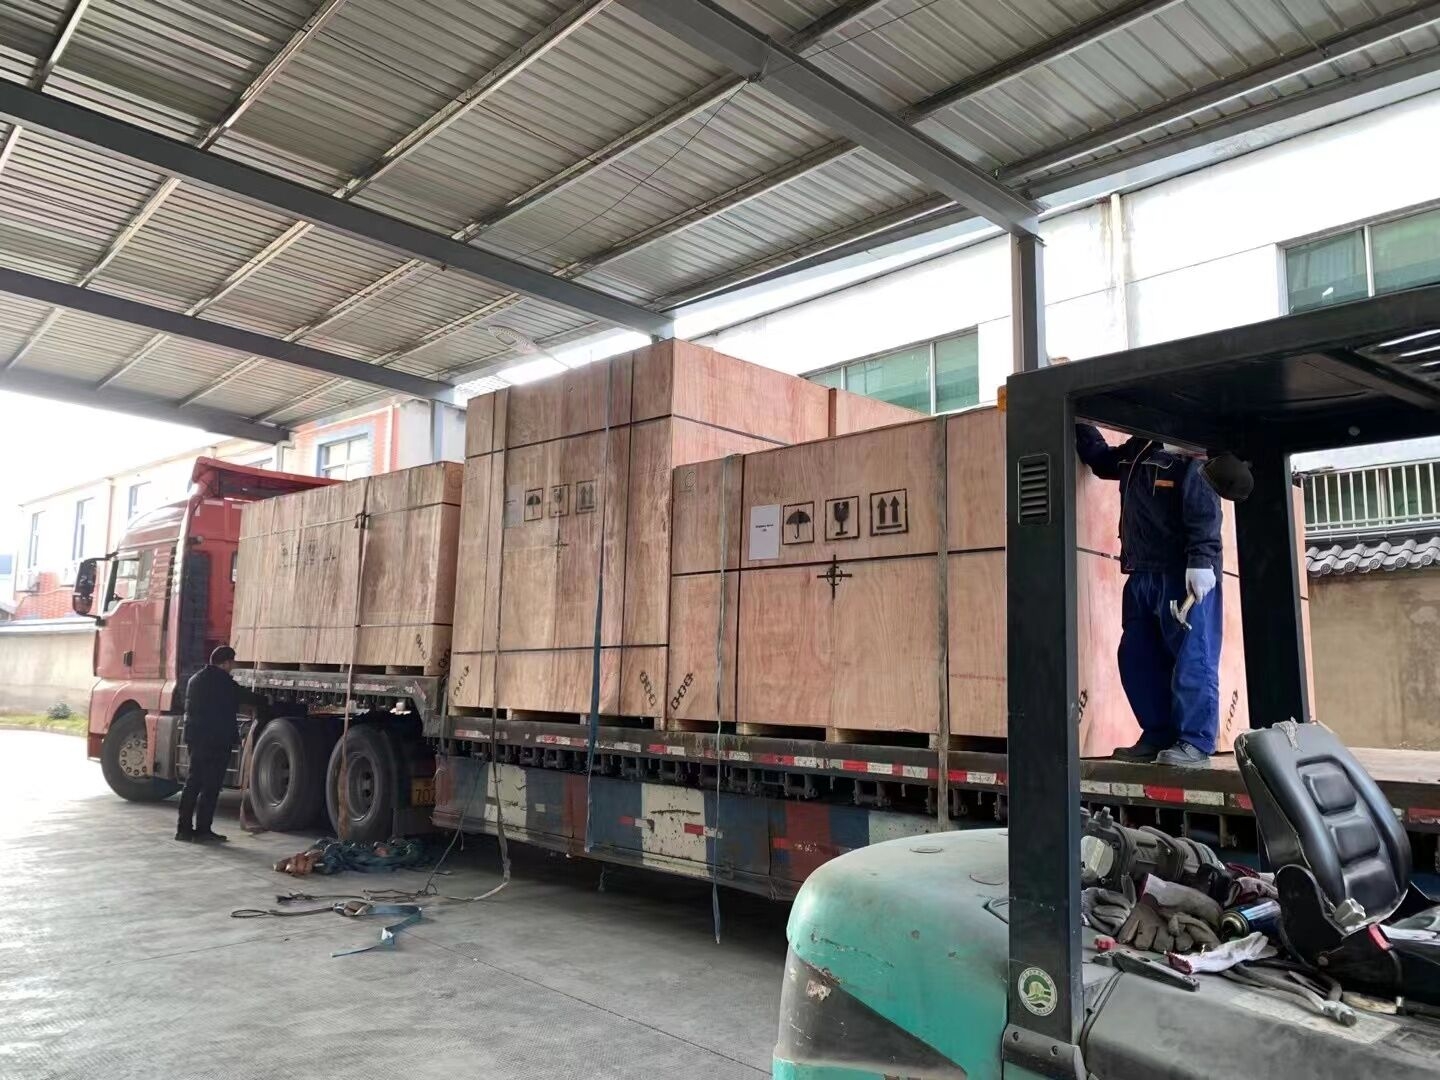 130M3 /h oxyegn generator  will  be shipped  to...